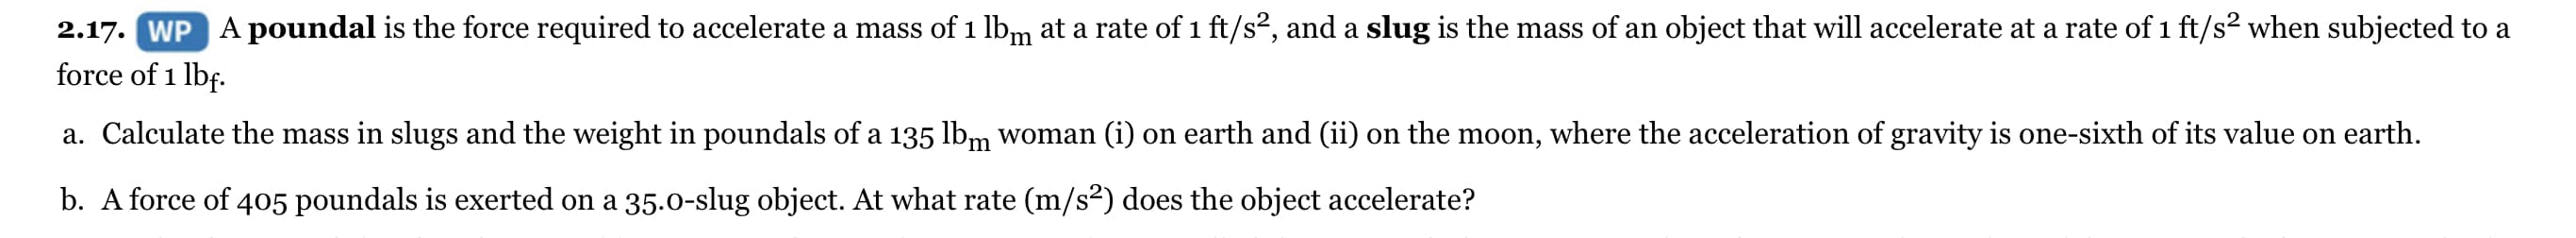 2.17. WP A poundal is the force required to accelerate a mass of 1 lbm at a rate of 1 ft/s², and a slug is the mass of an object that will accelerate at a rate of 1 ft/s² when subjected to a
force of 1 lbf.
a. Calculate the mass in slugs and the weight in poundals of a 135 lbm woman (i) on earth and (ii) on the moon, where the acceleration of gravity is one-sixth of its value on earth.
b. A force of 405 poundals is exerted on a 35.0-slug object. At what rate (m/s²) does the object accelerate?
